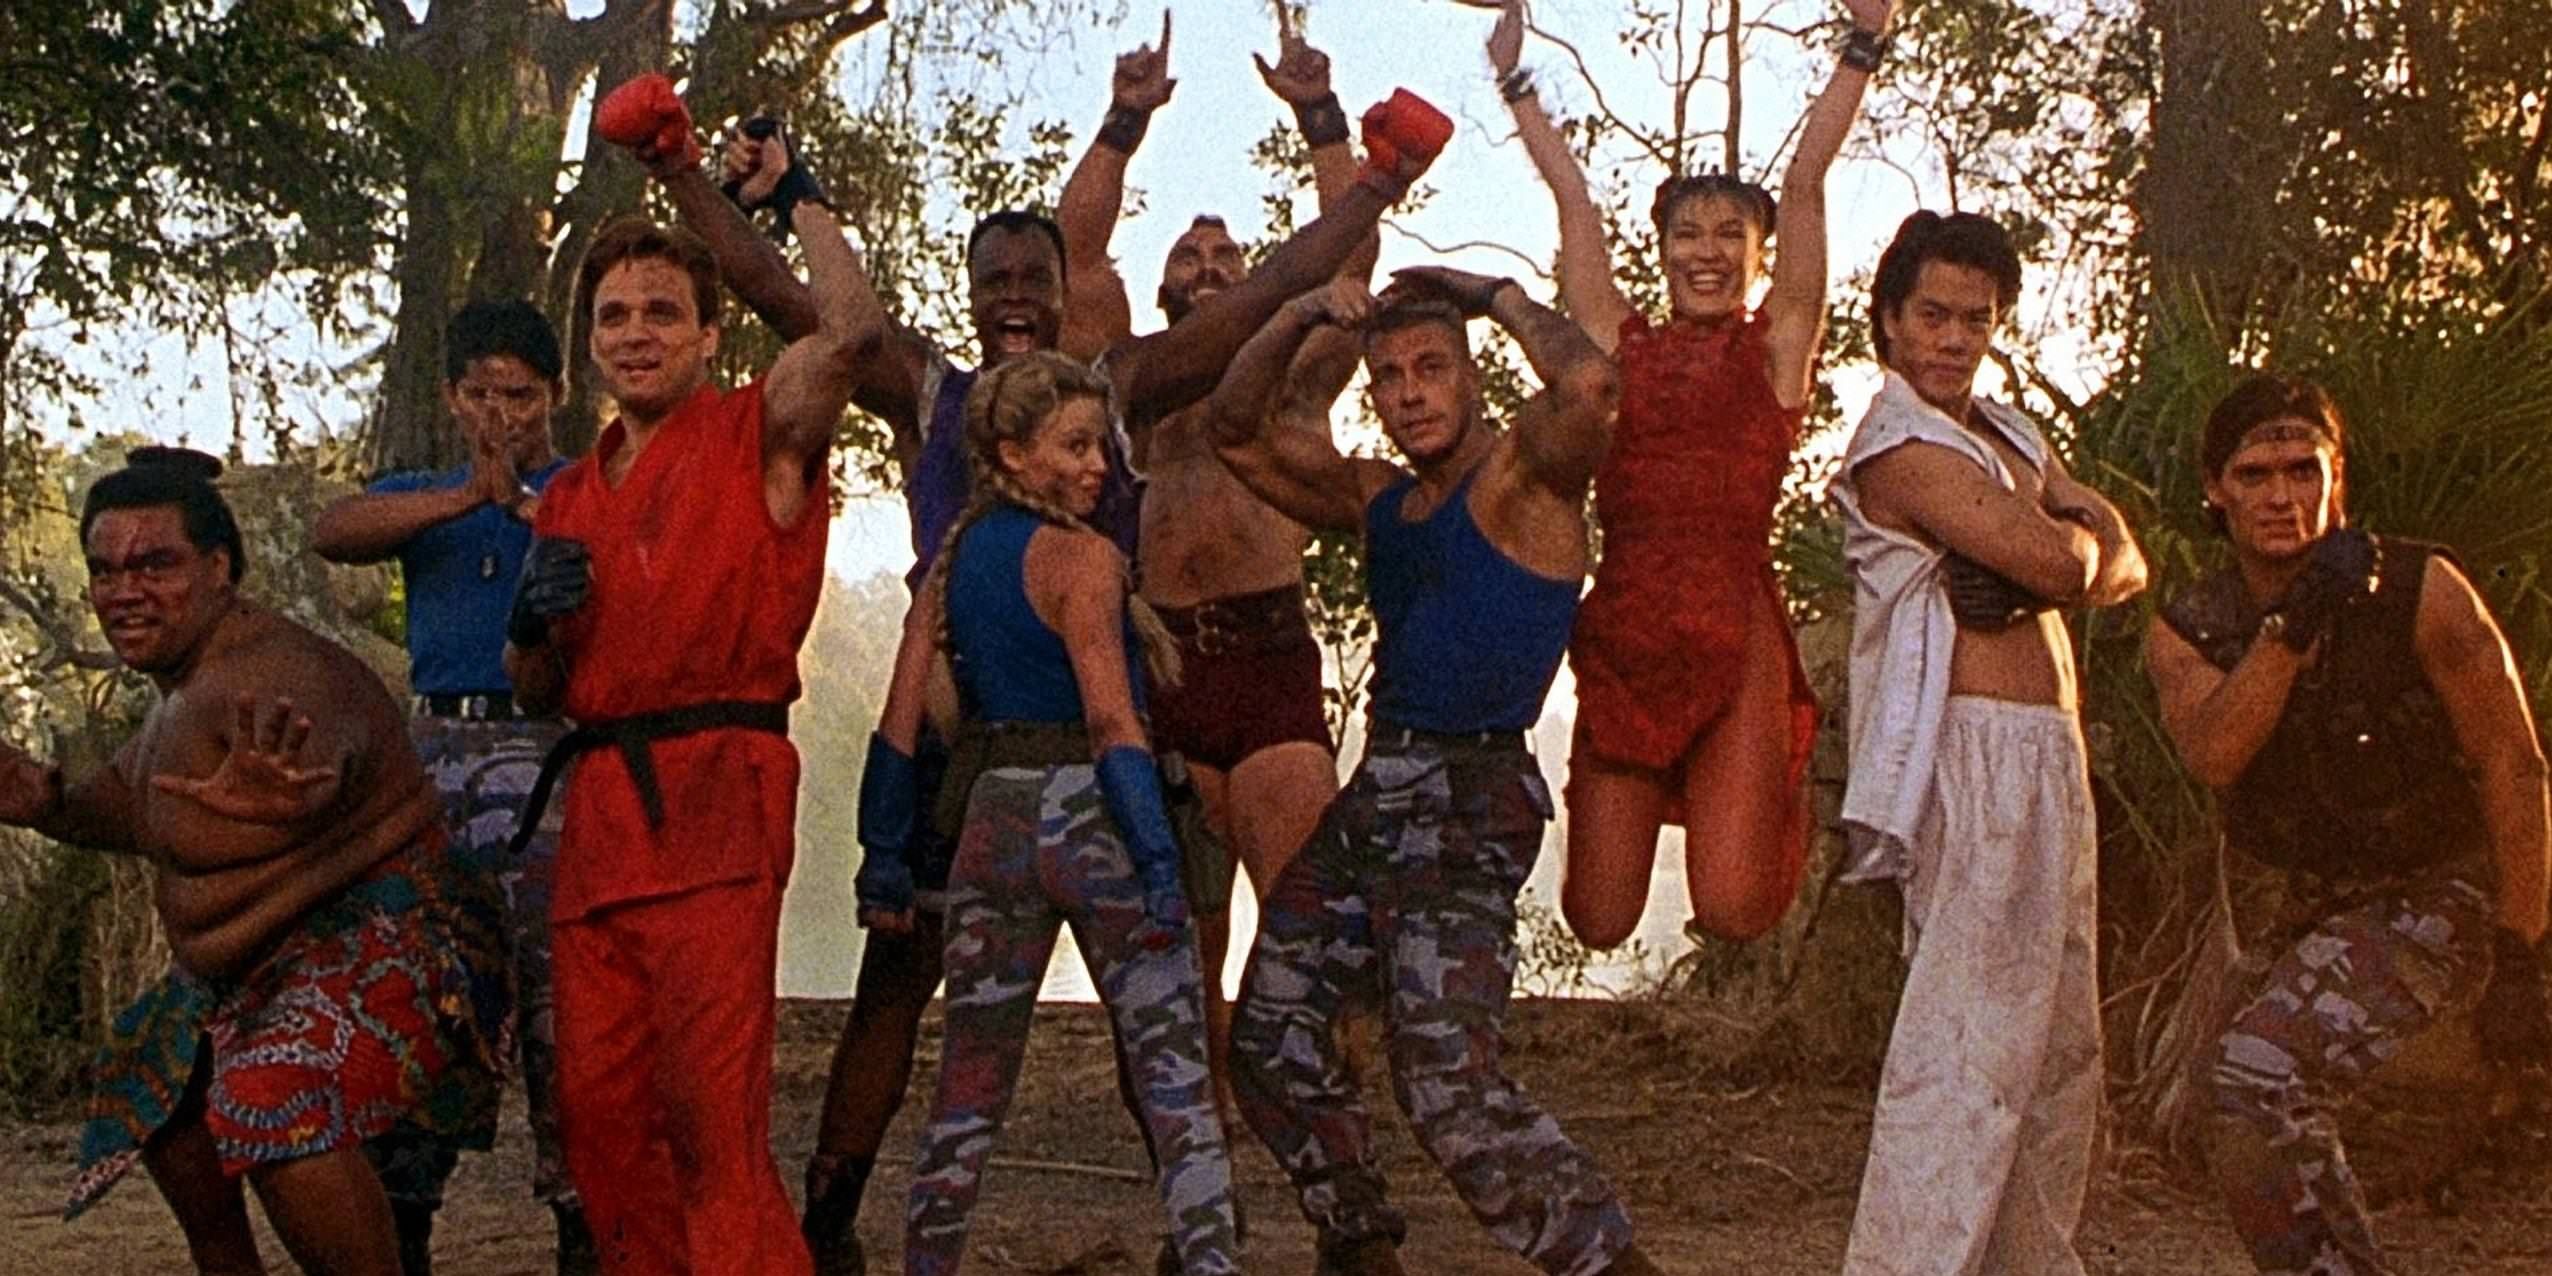 10 Old Martial Arts Movies So Bad They’re Great